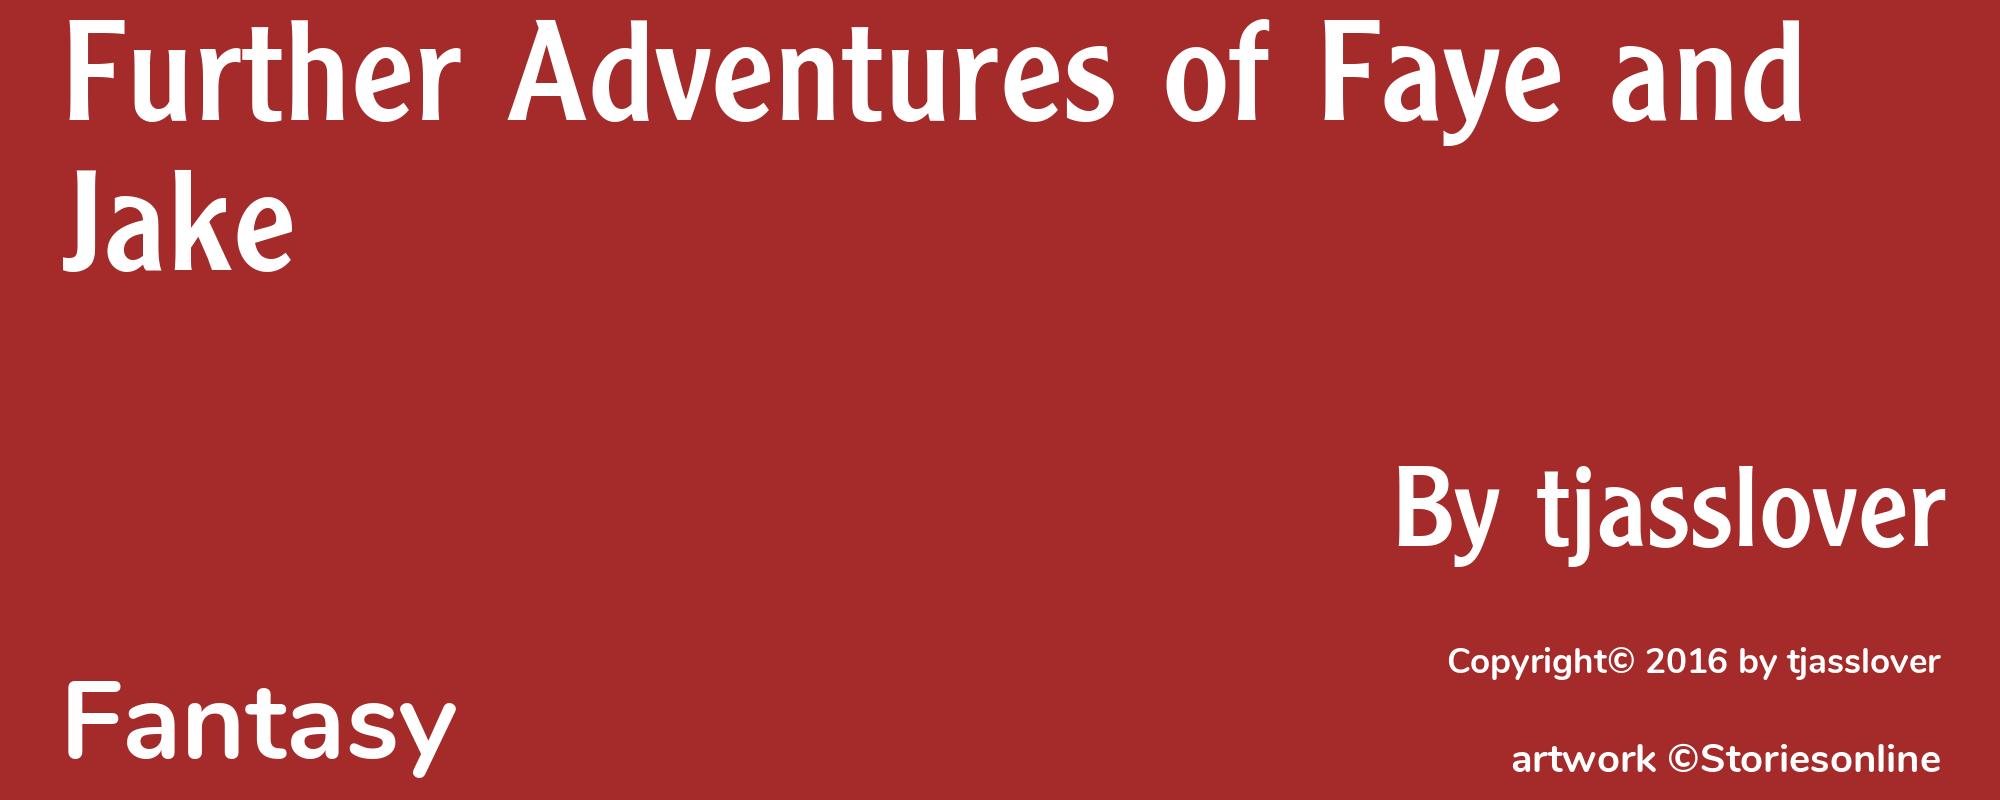 Further Adventures of Faye and Jake - Cover